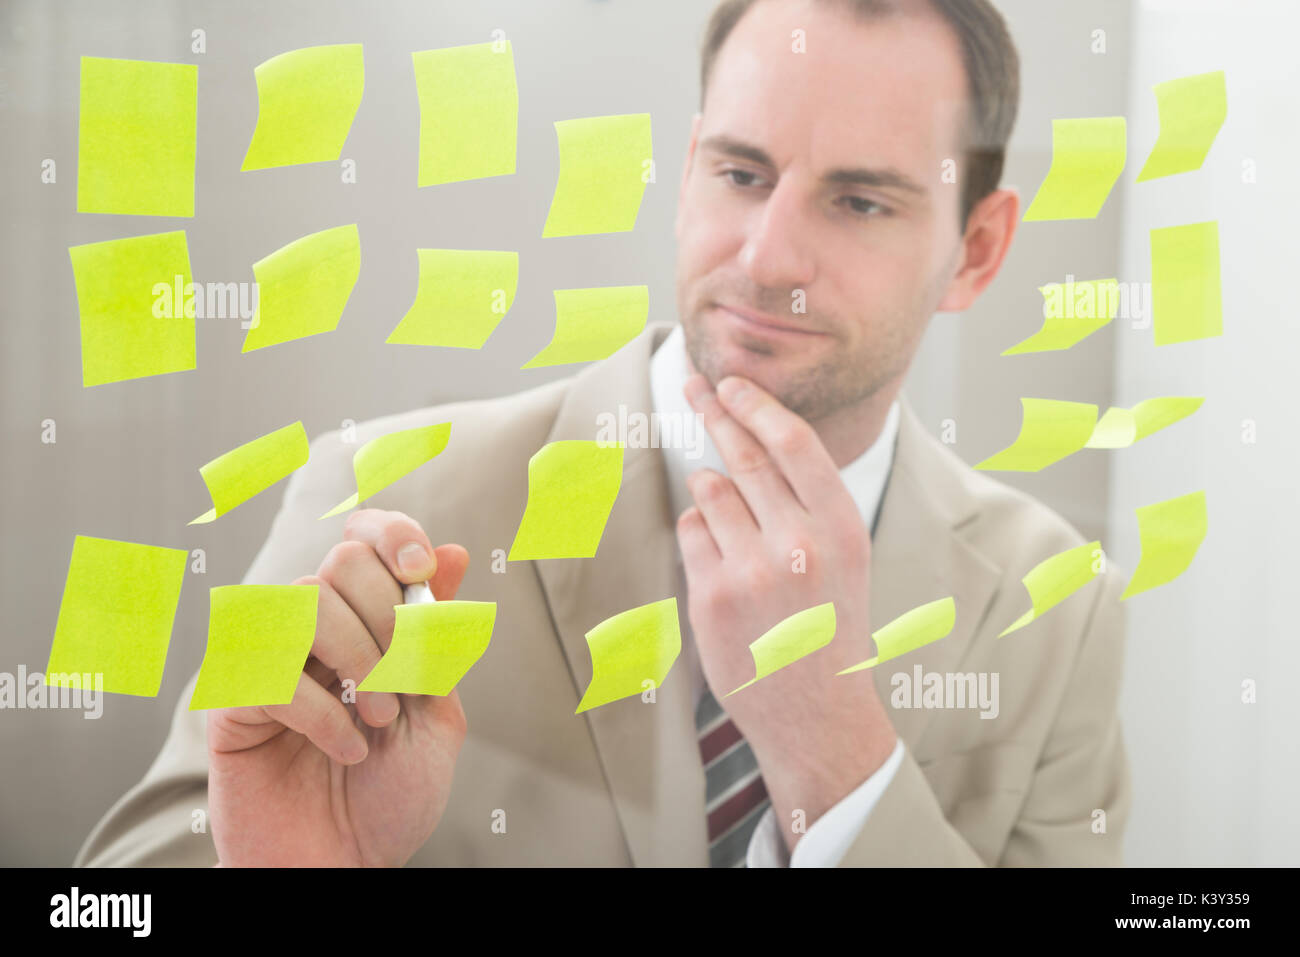 Contemplating Businessman Making Notes On Adhesive Paper Stock Photo